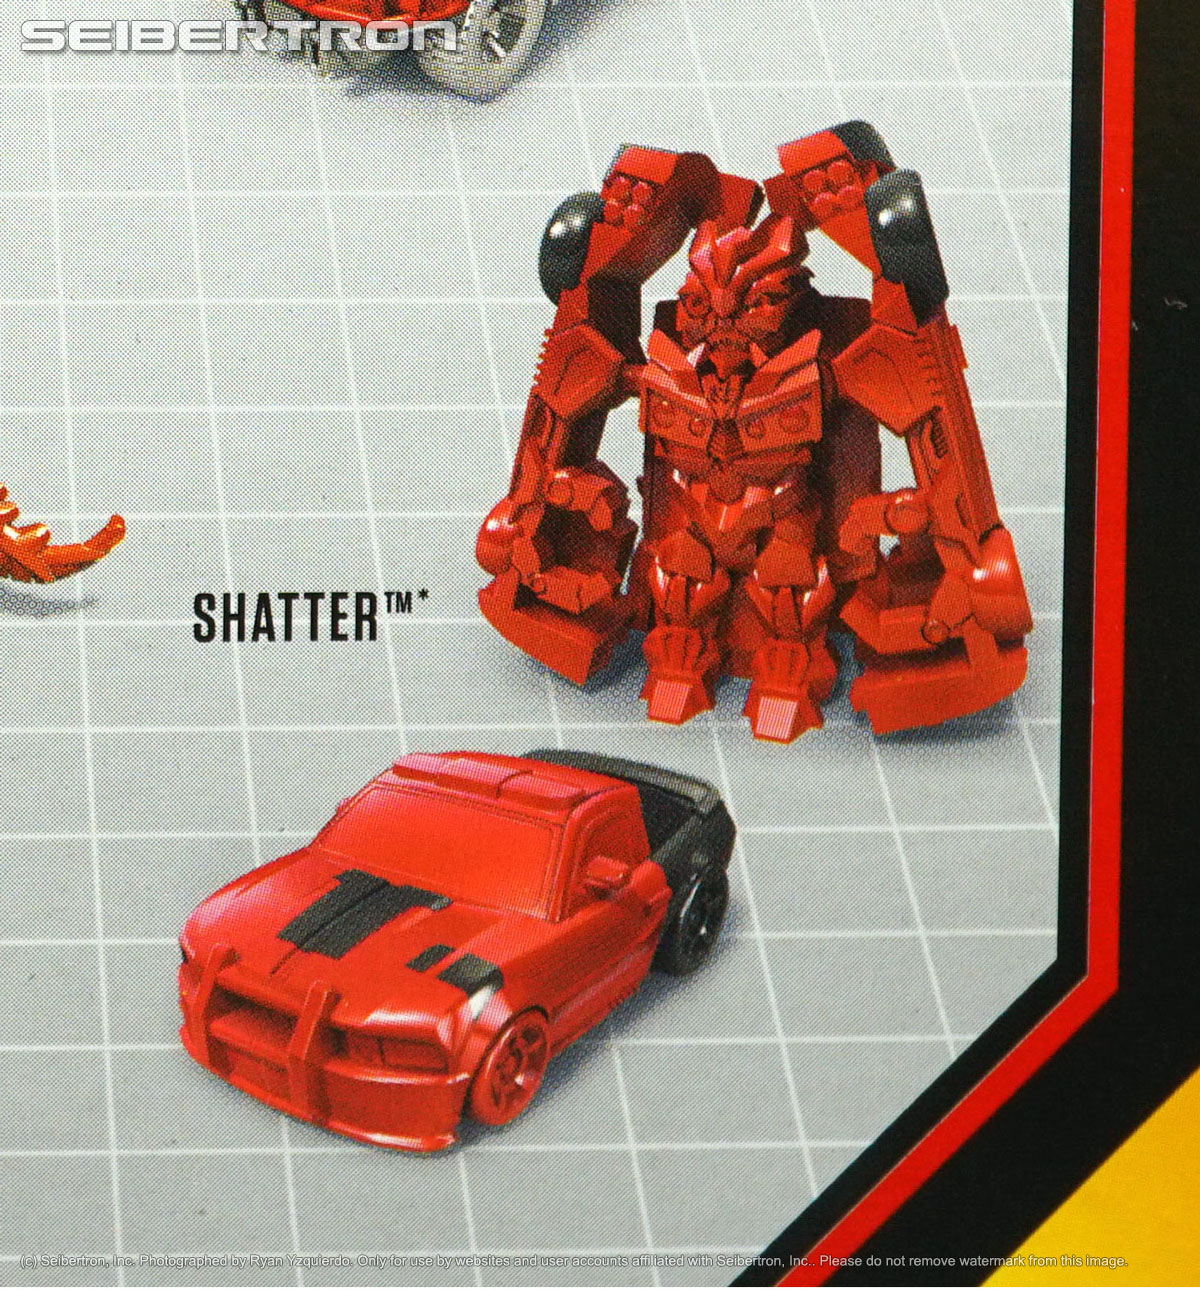 Series 4 SHATTER Transformers Tiny Turbo Changers Movie Edition 2018 Hasbro New